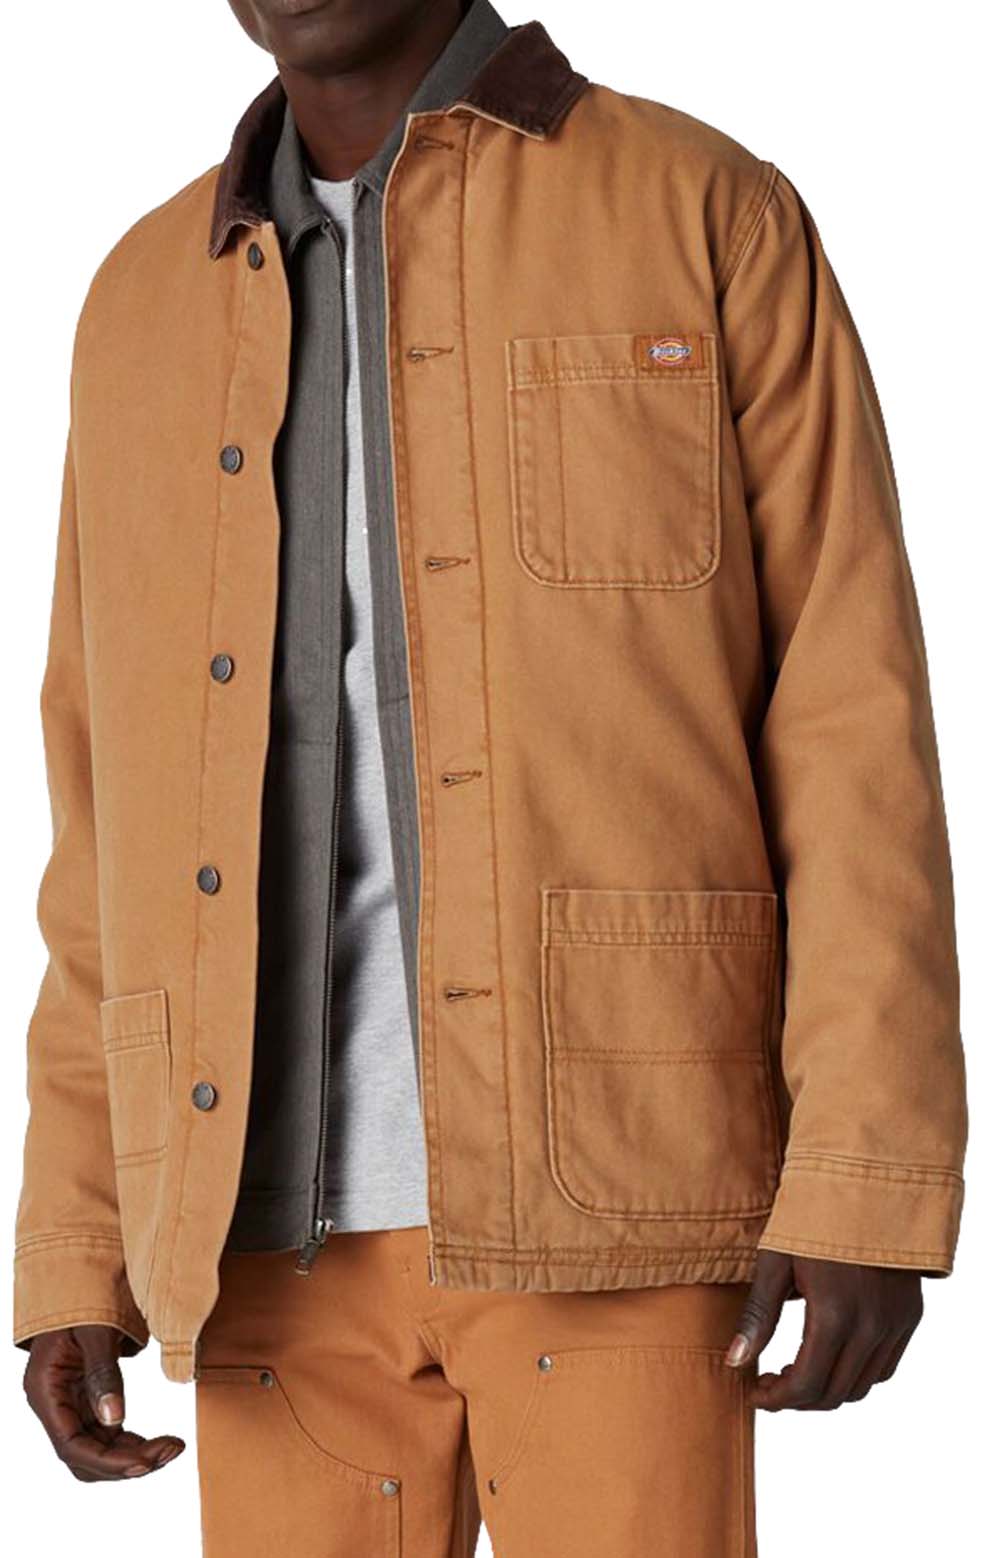 (TCR04SBD) Stonewashed Duck Lined Chore Coat - Stonewashed Brown Duck